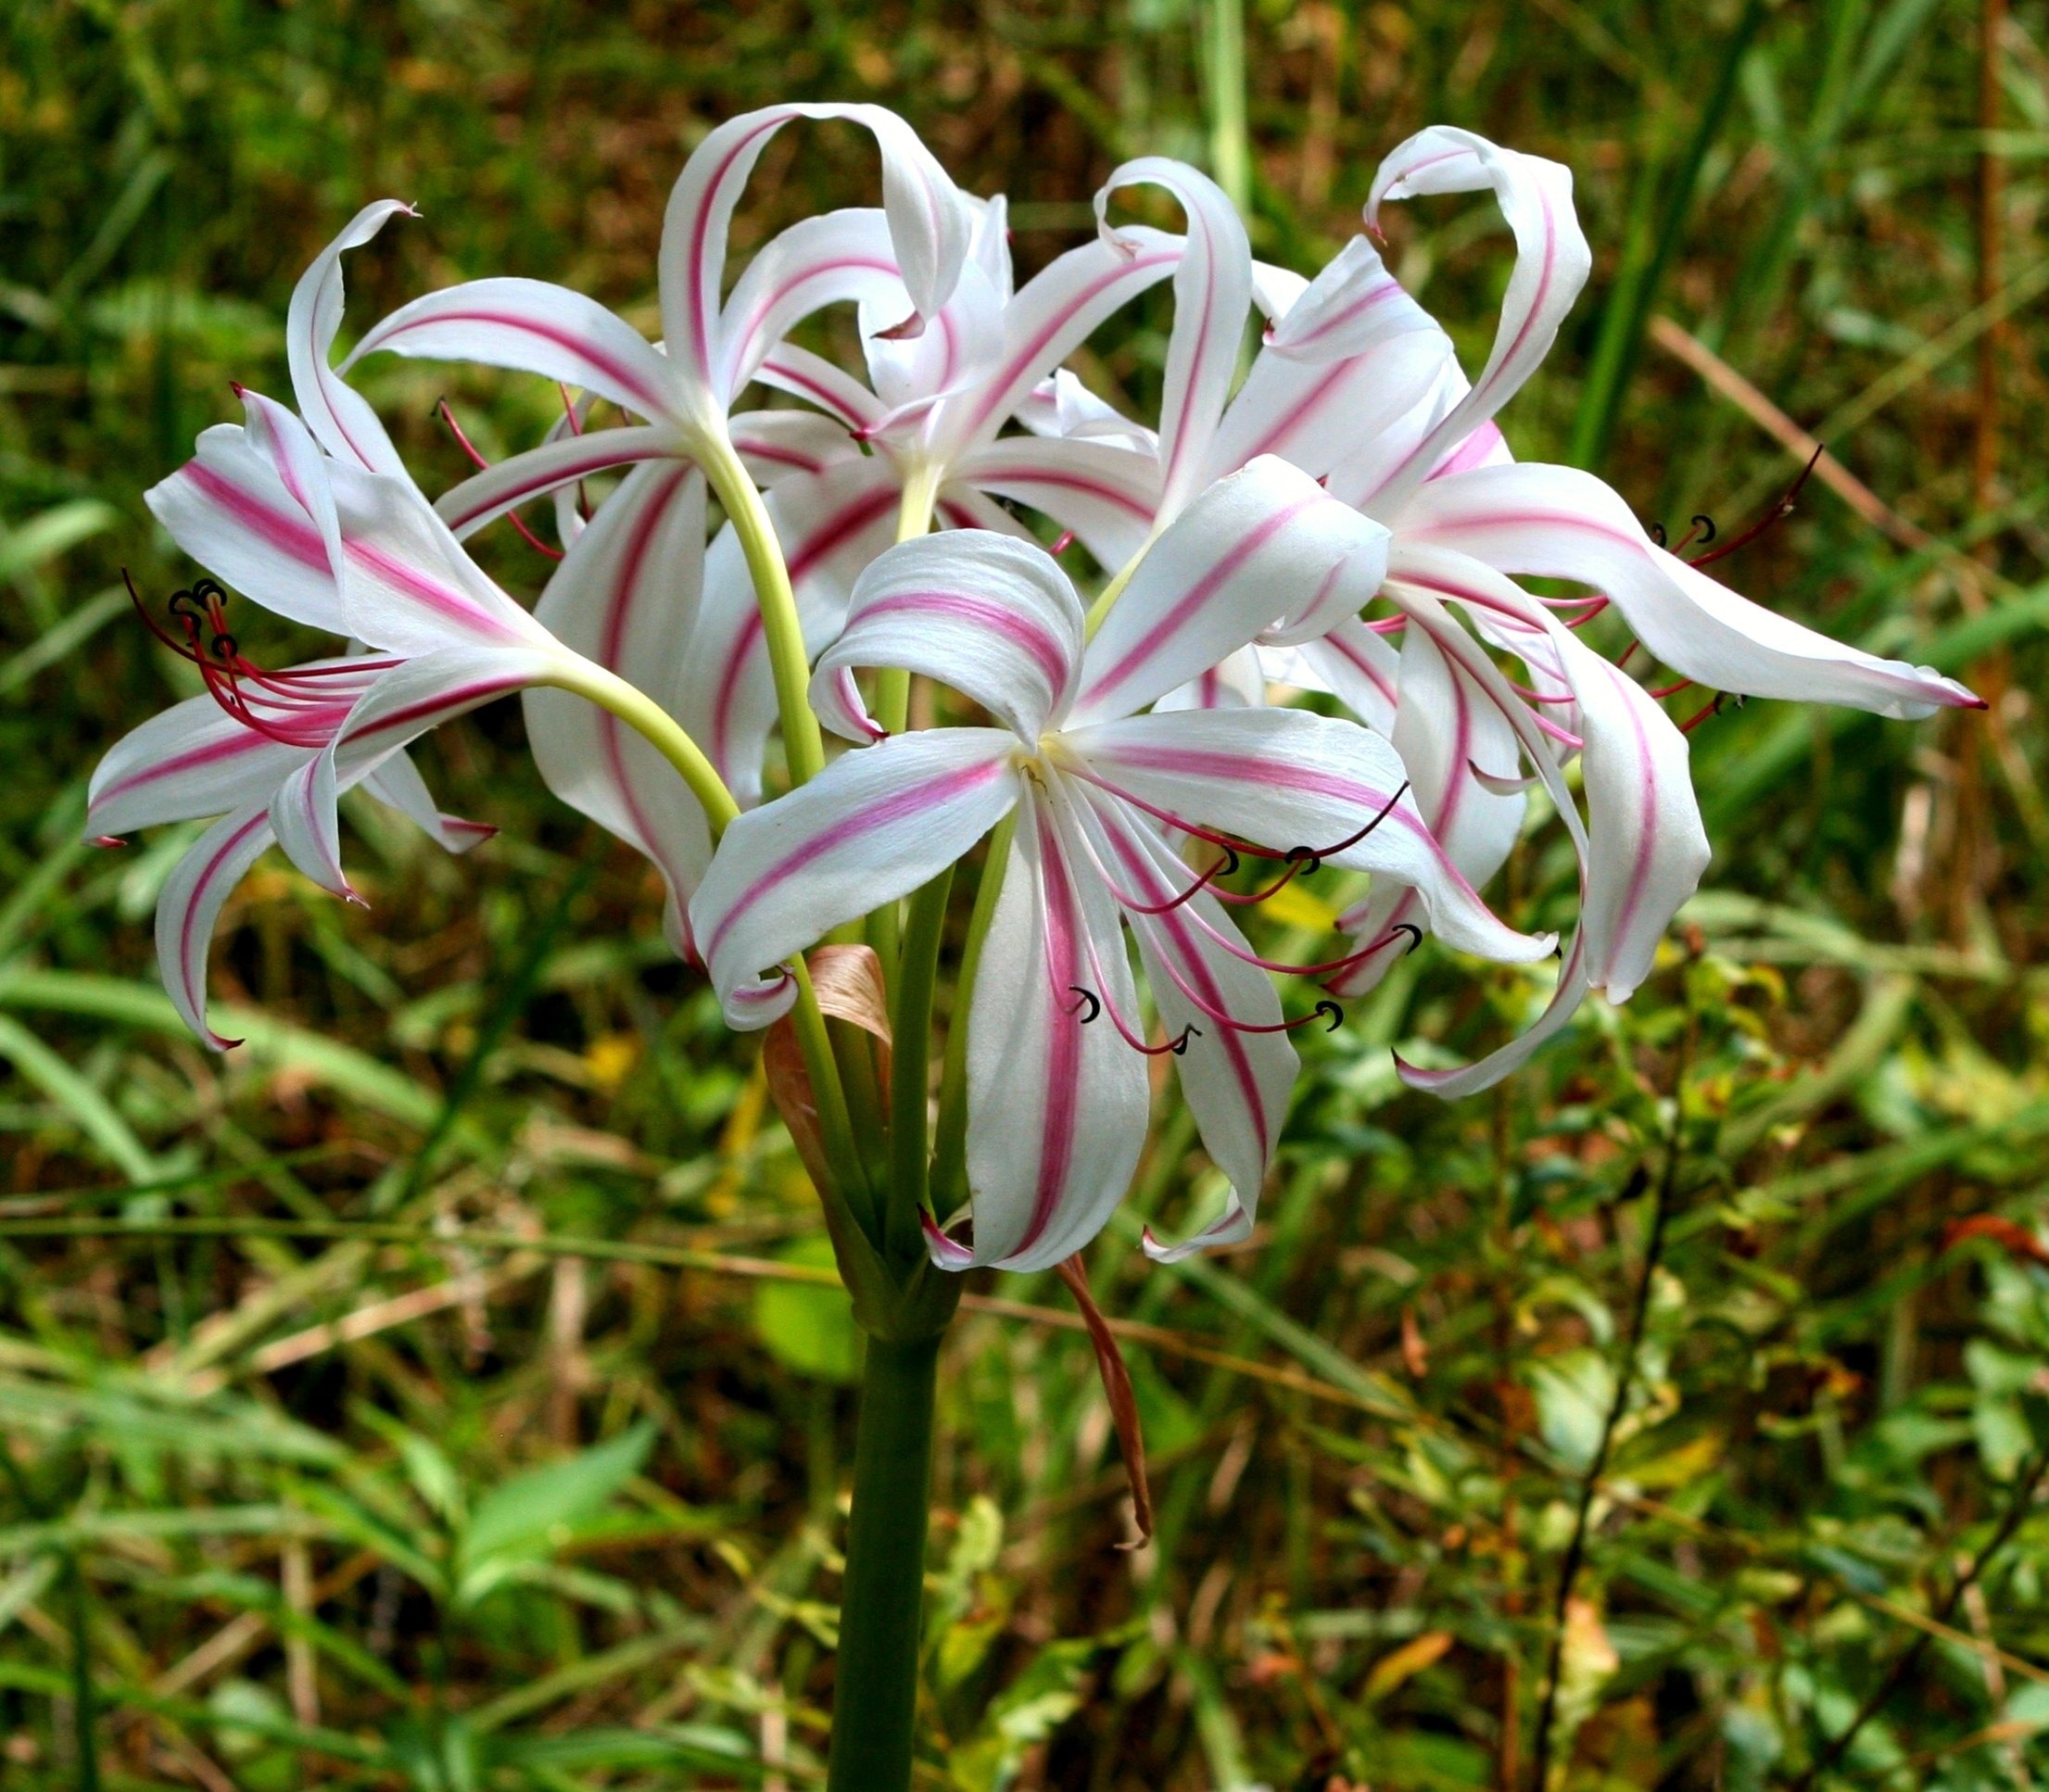 white and pink clustered petaled flowers